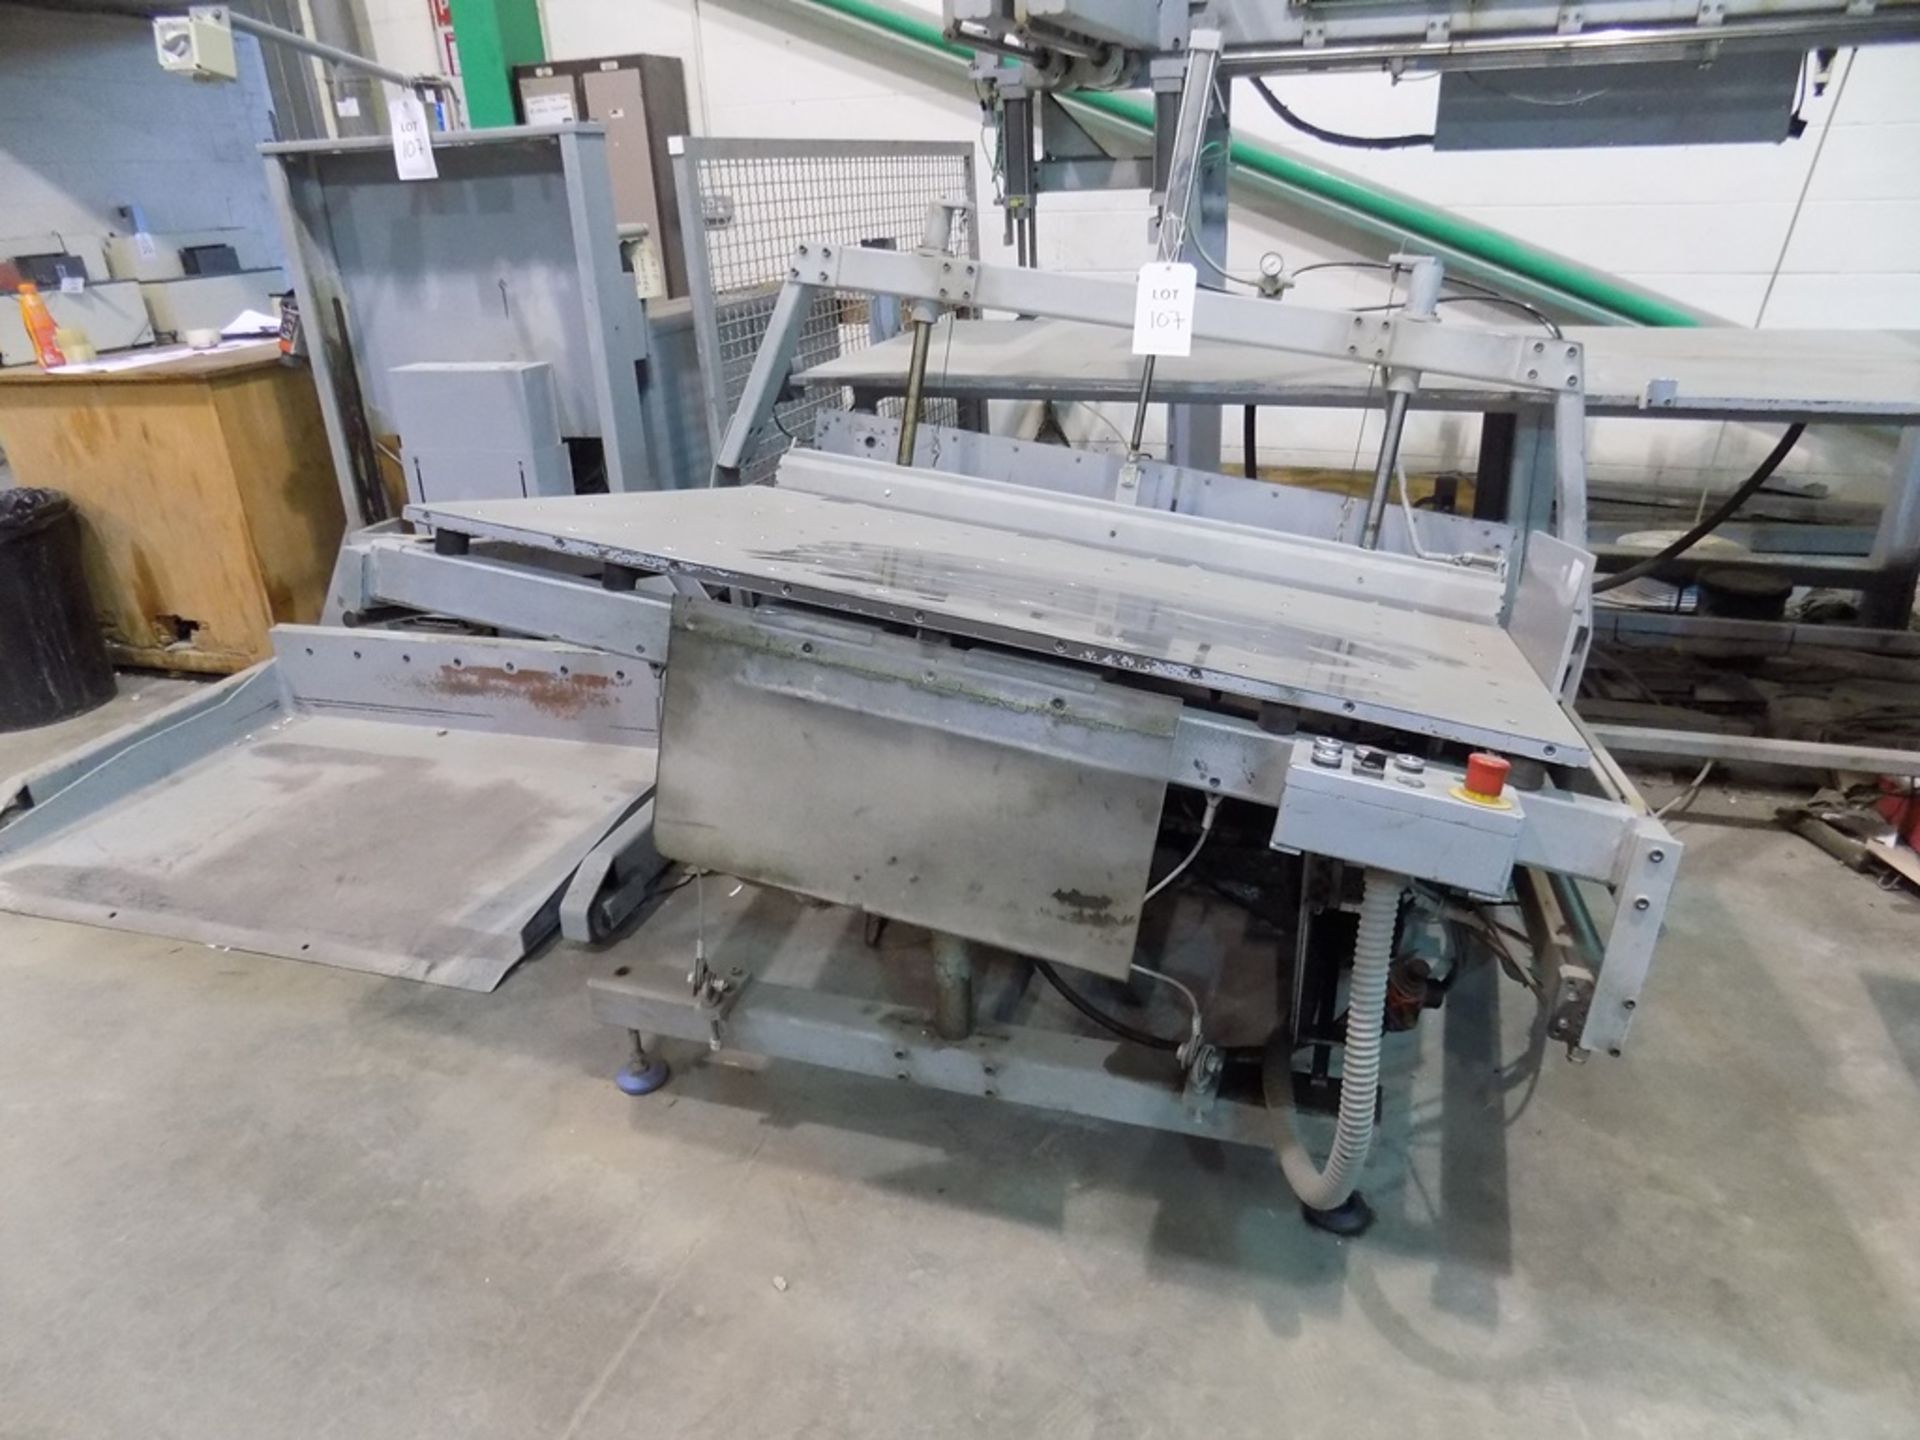 Schneider Senator 132 MCV paper guillotine, s/n 51751, year 1990, with roller feed tables, trim - Image 3 of 6